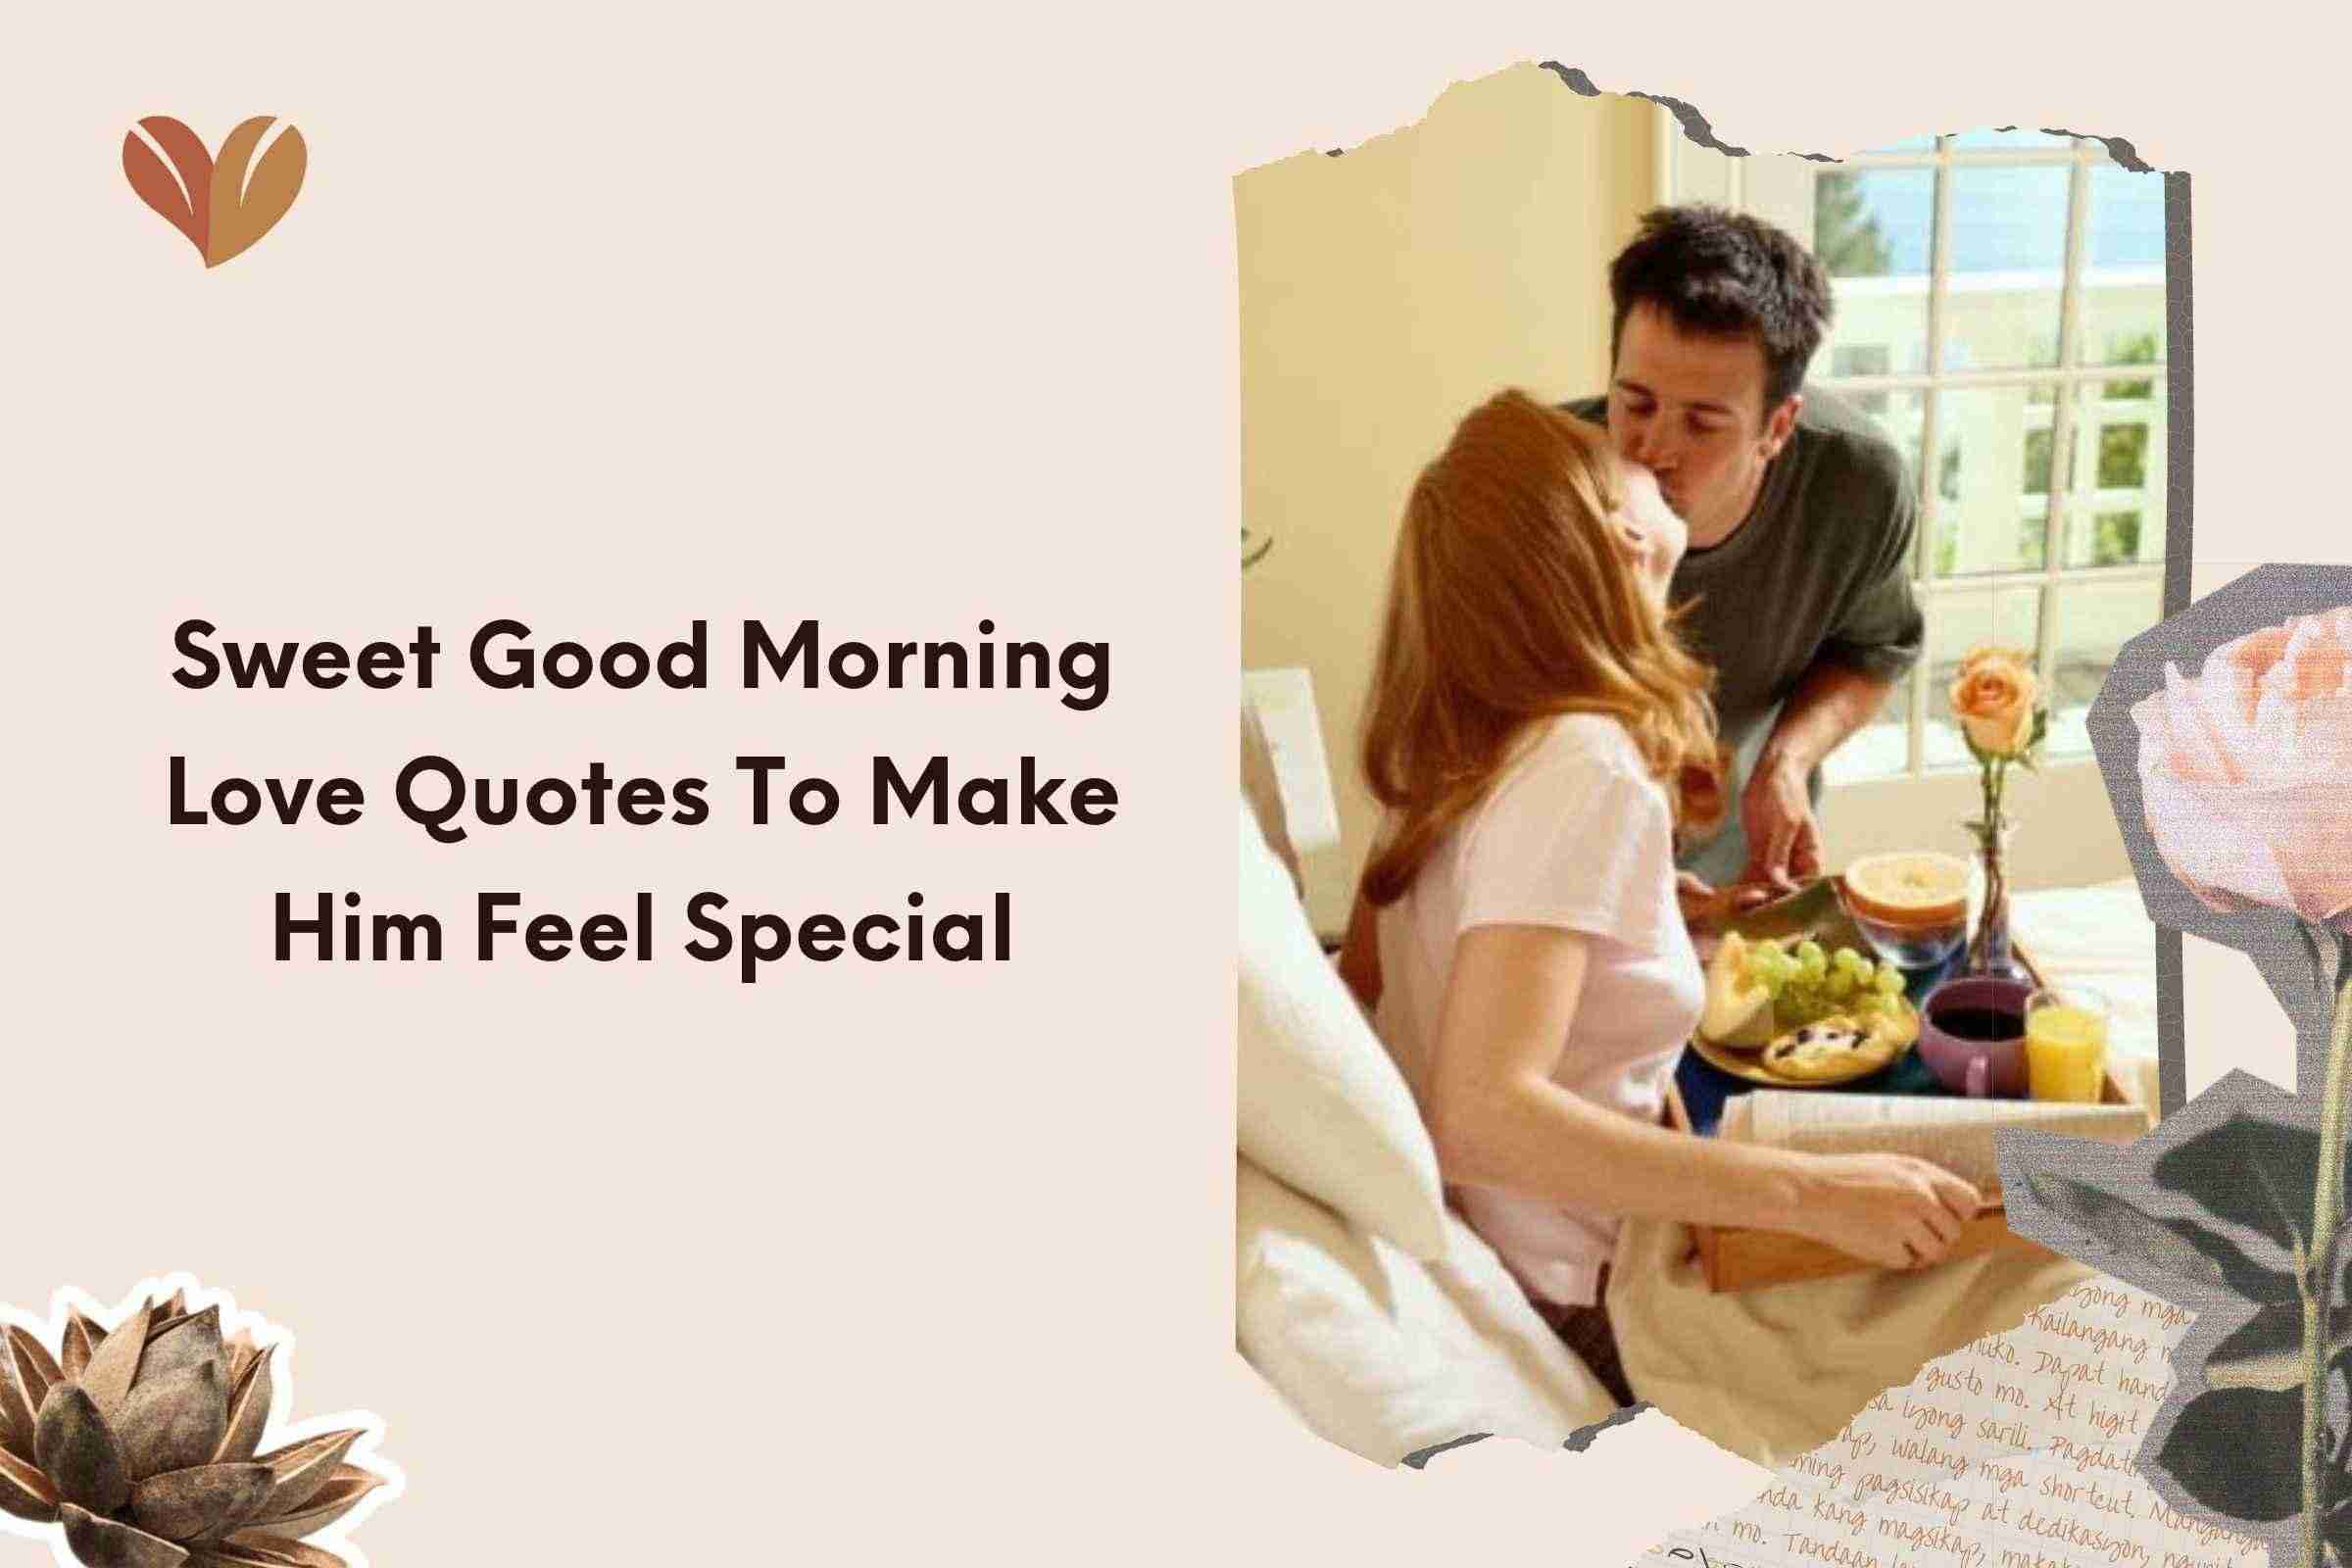 Sweet Good Morning Love Quotes To Make Him Feel Special